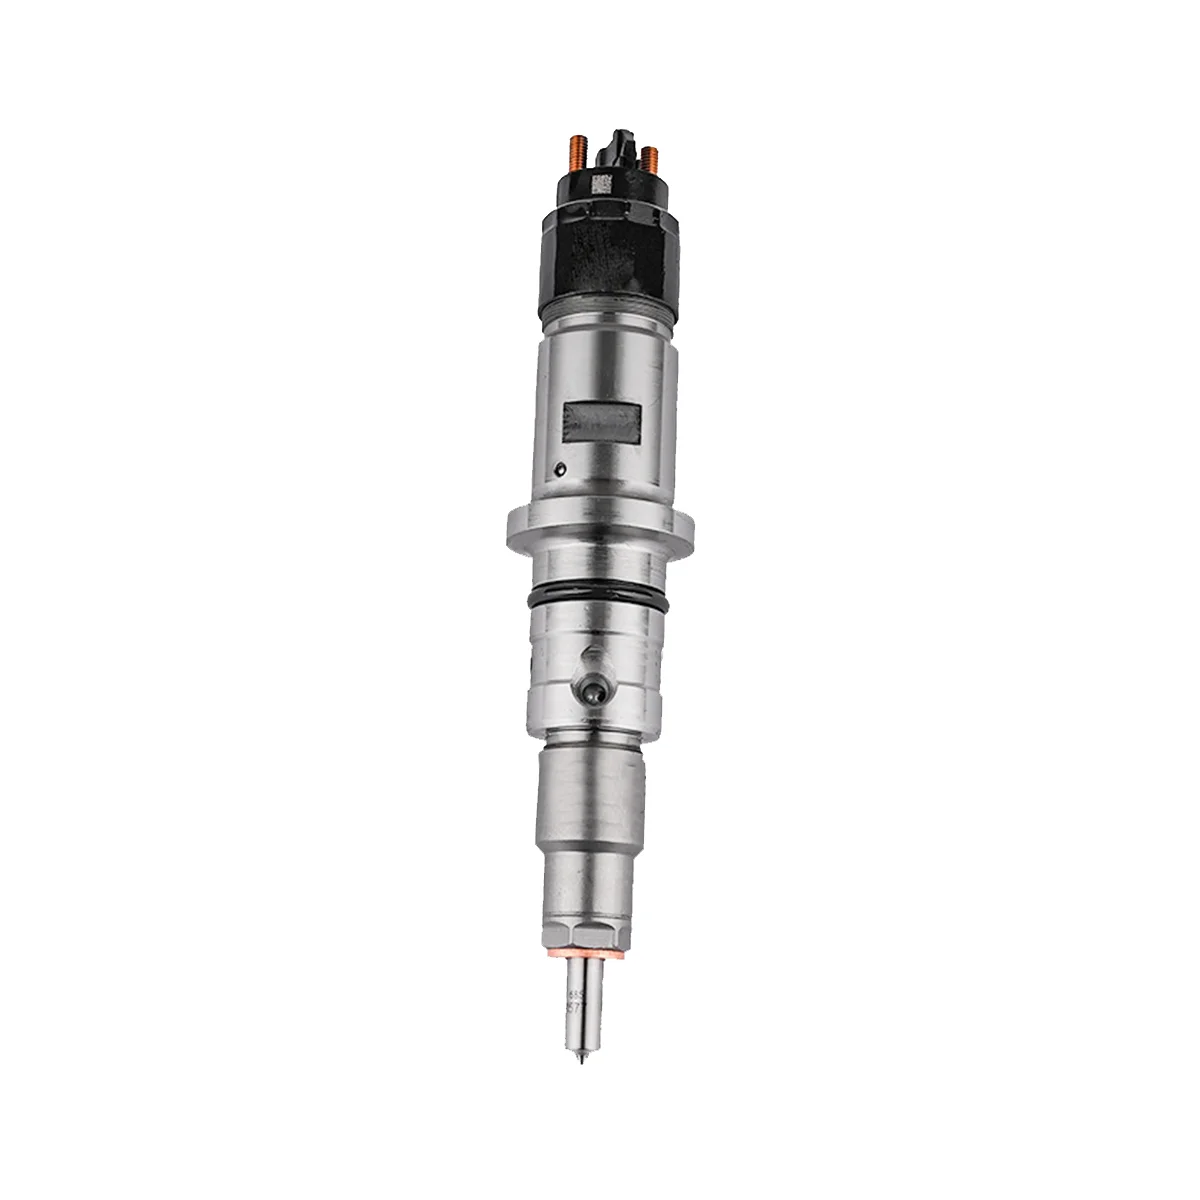 

0445120183 New Crude Oil Fuel Injector Nozzle for Cummins DongFeng EHQ200 Tianjin EQ4H